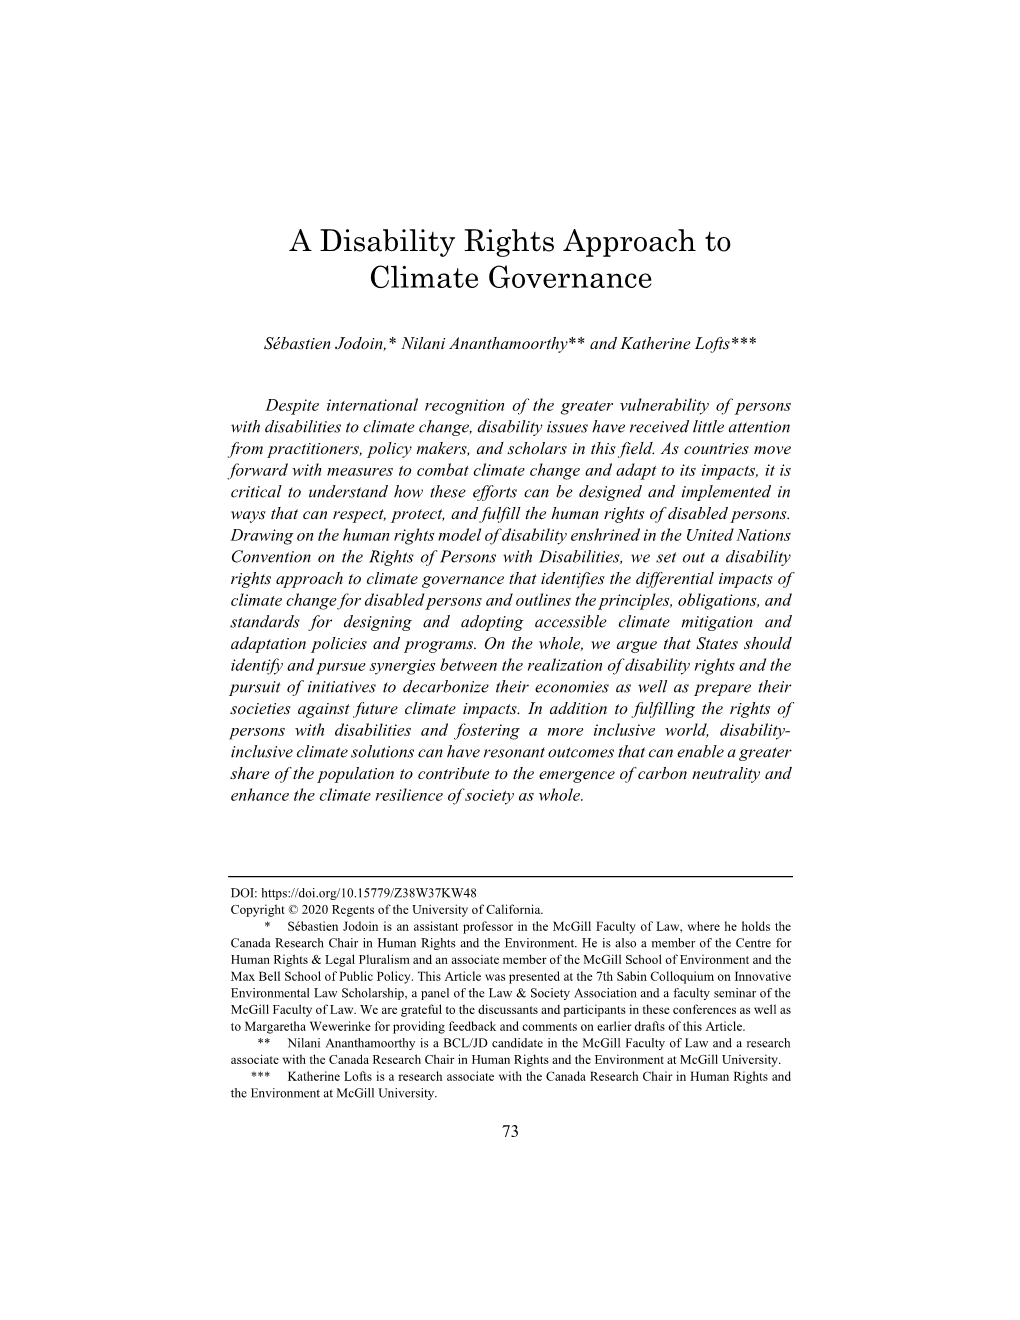 A Disability Rights Approach to Climate Governance